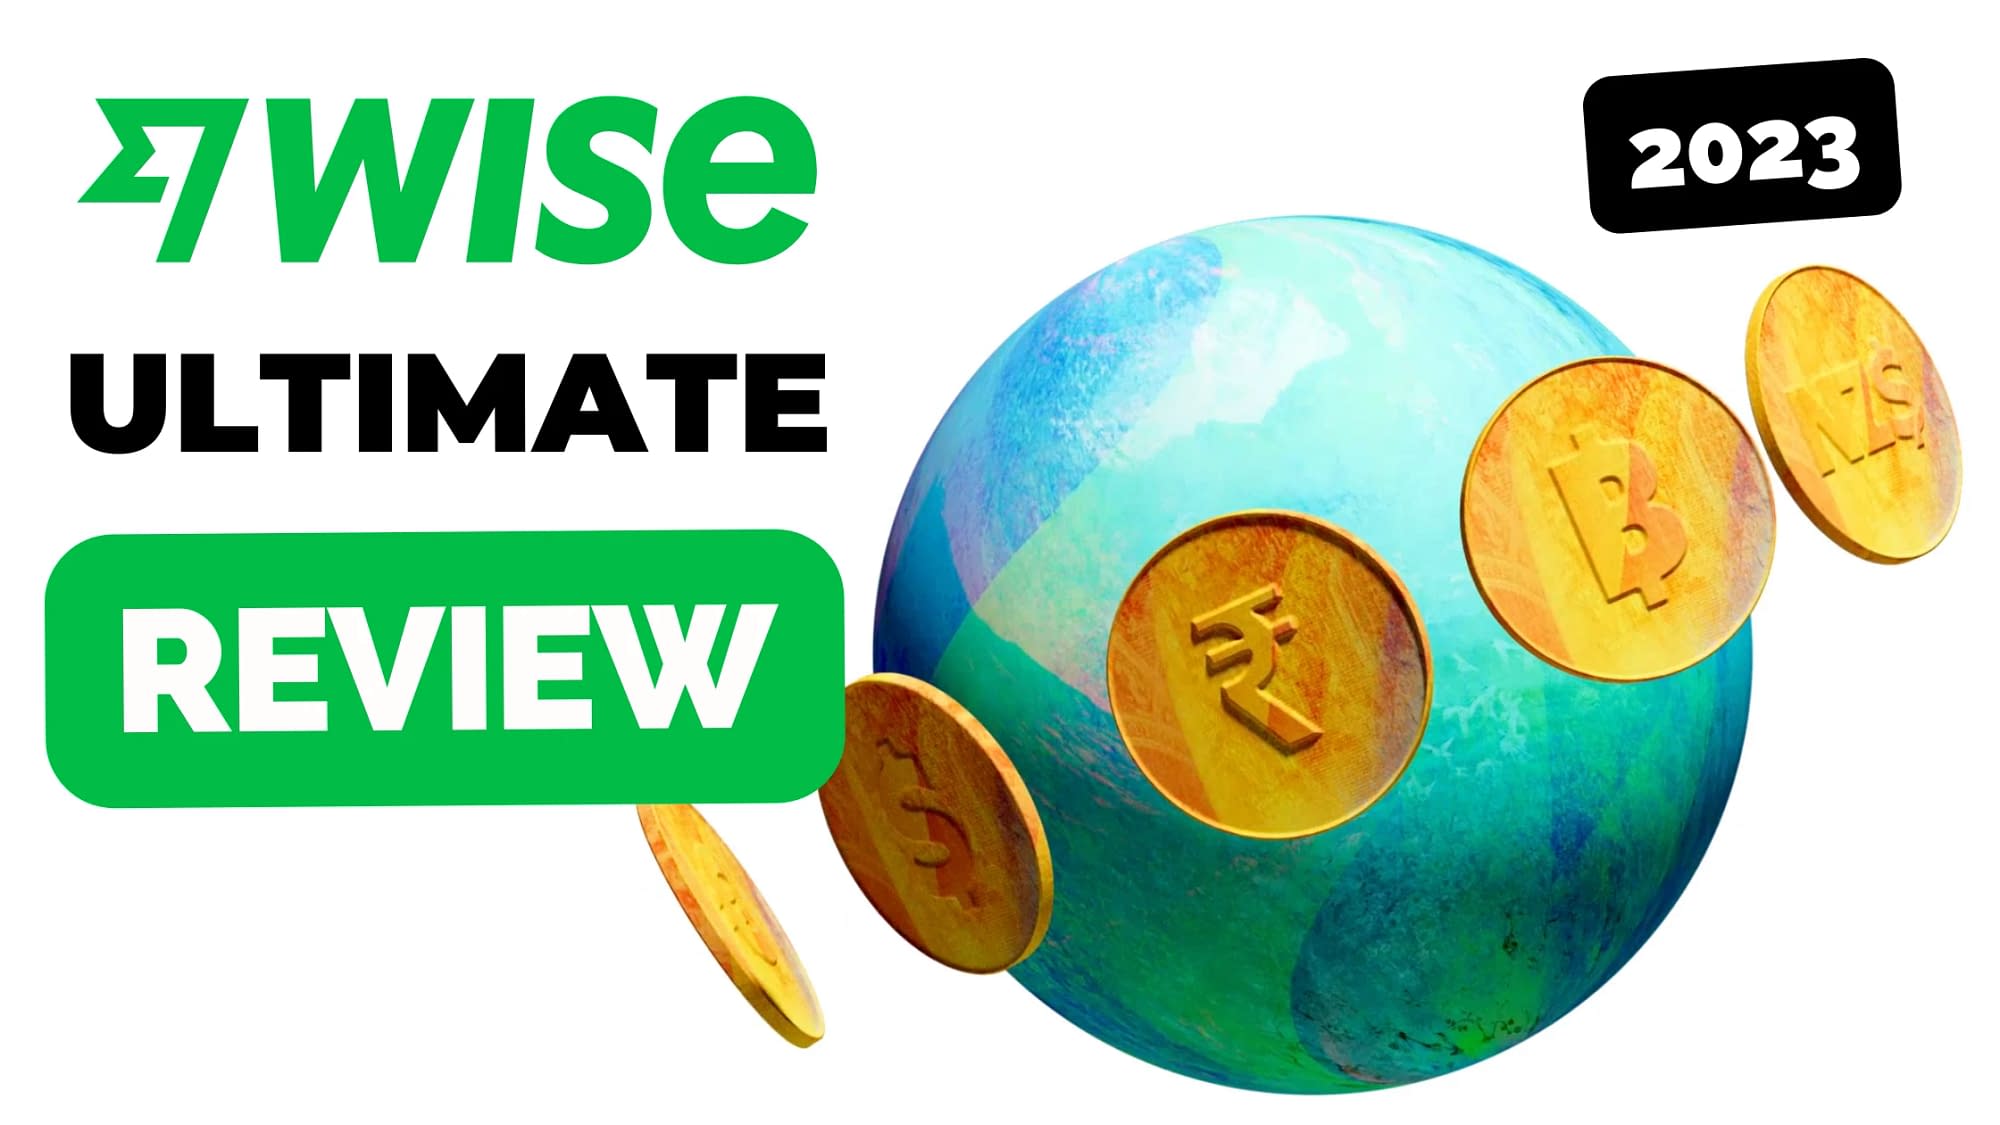 Wise Review by AirLapse (2023)